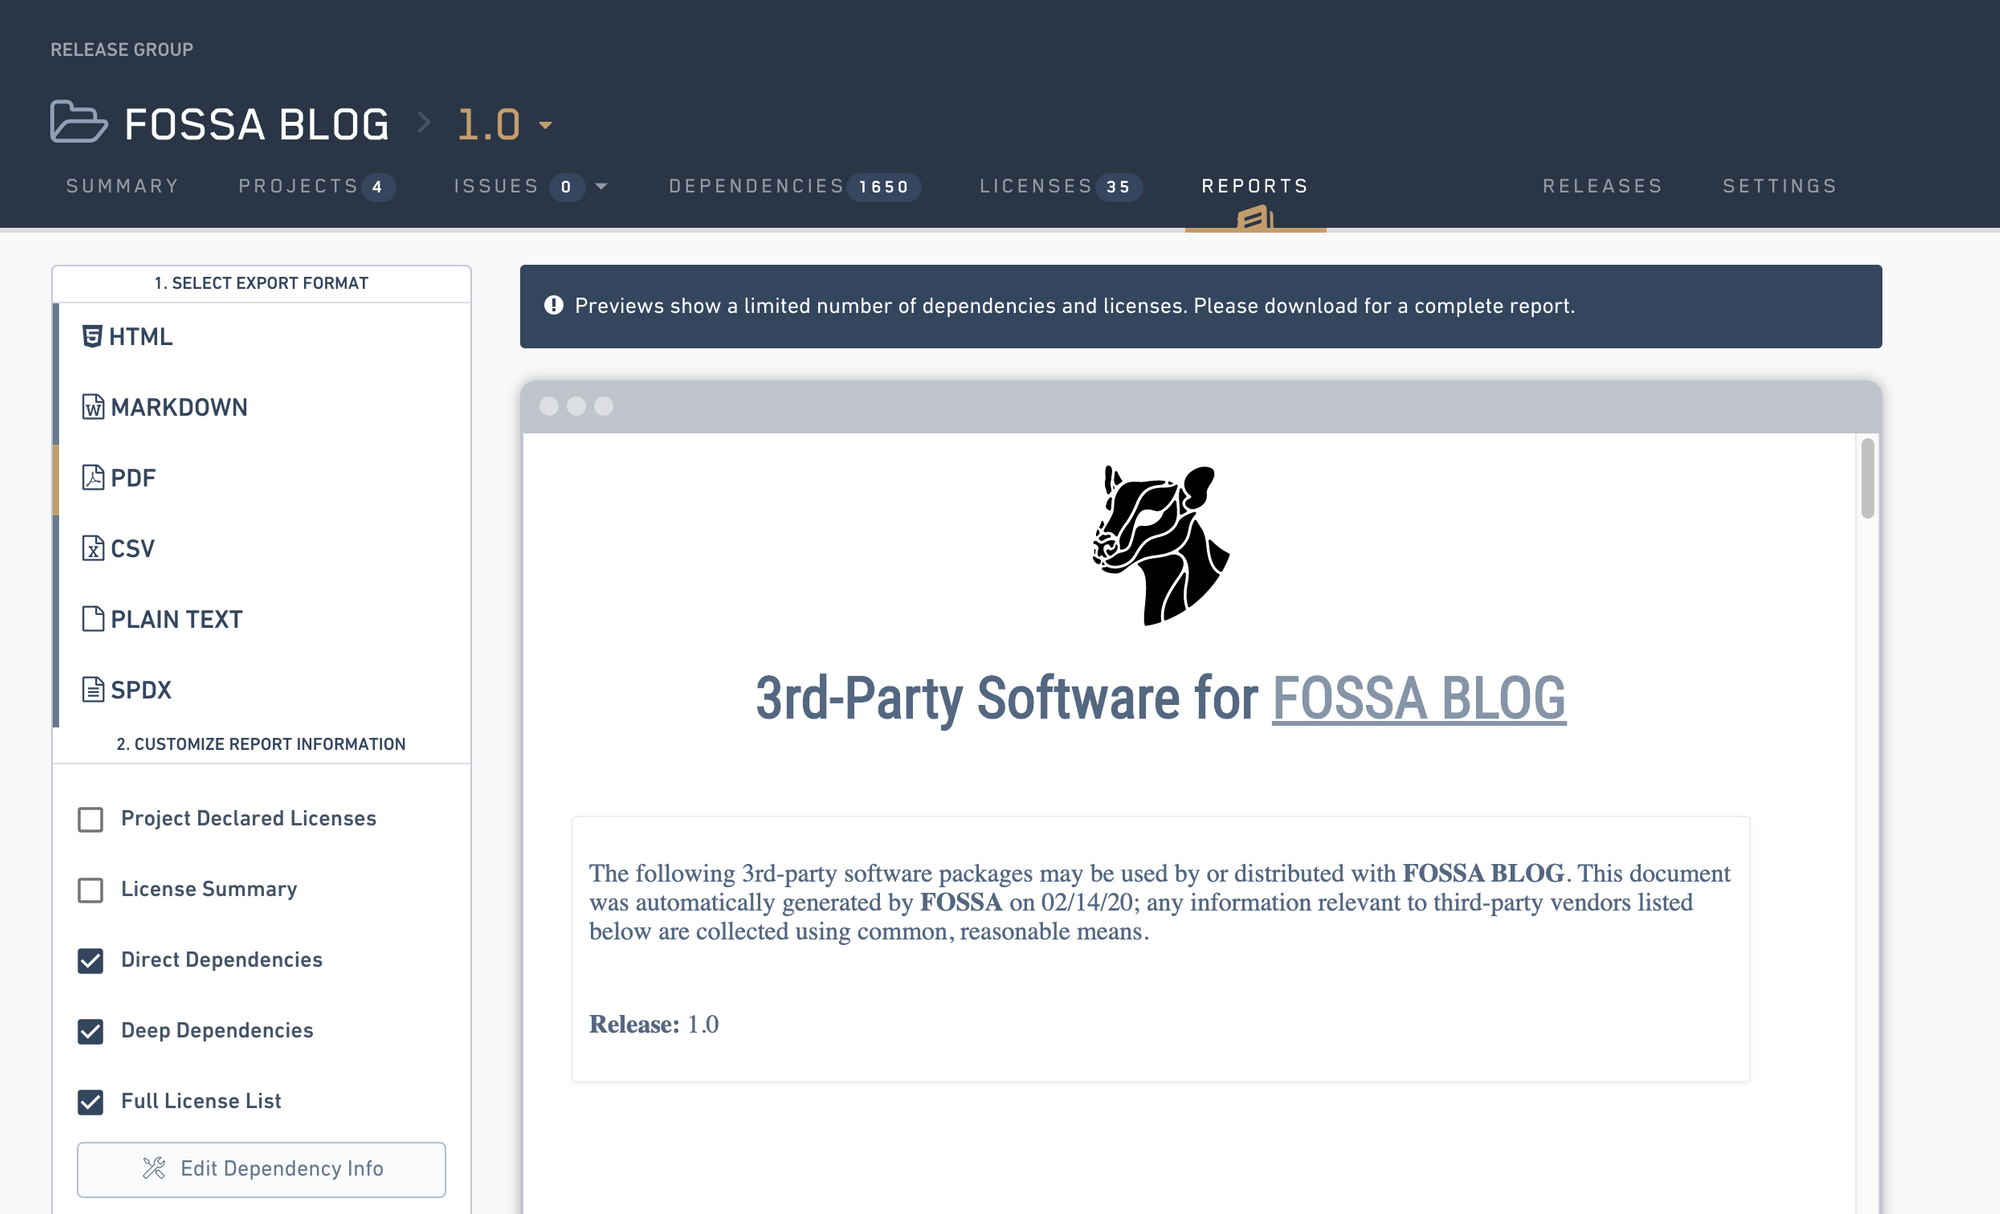 FOSSA January 2020 Release Notes Image - Release Groups